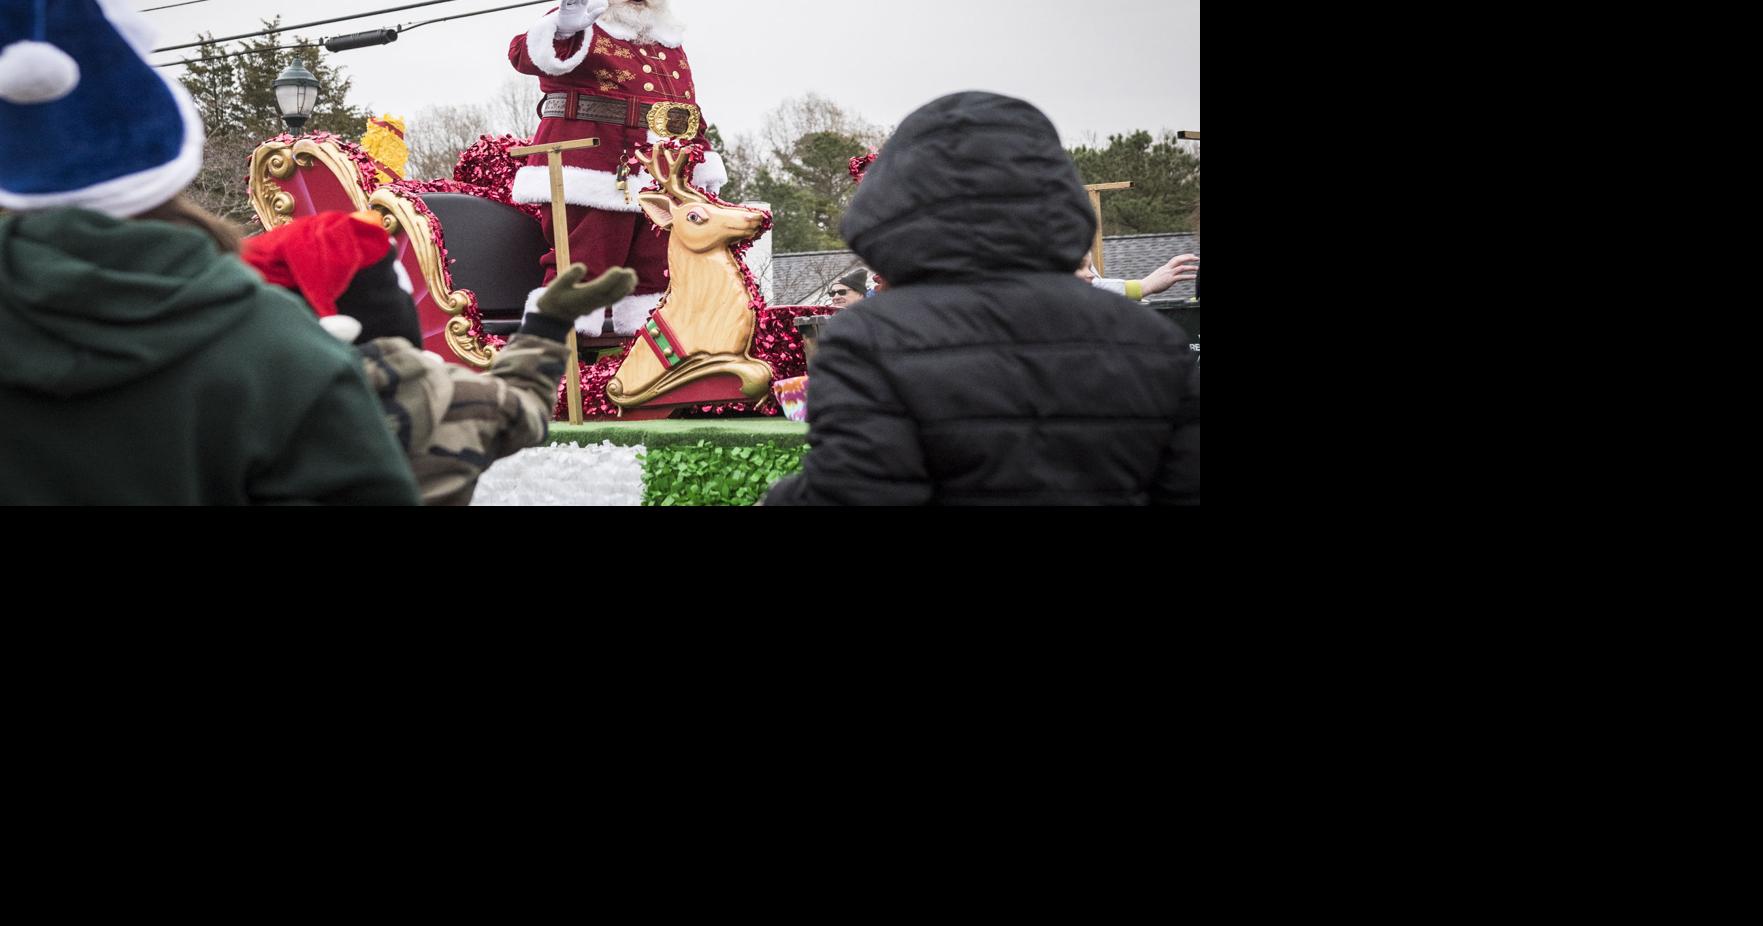 Lewisville celebrates with annual Christmas parade